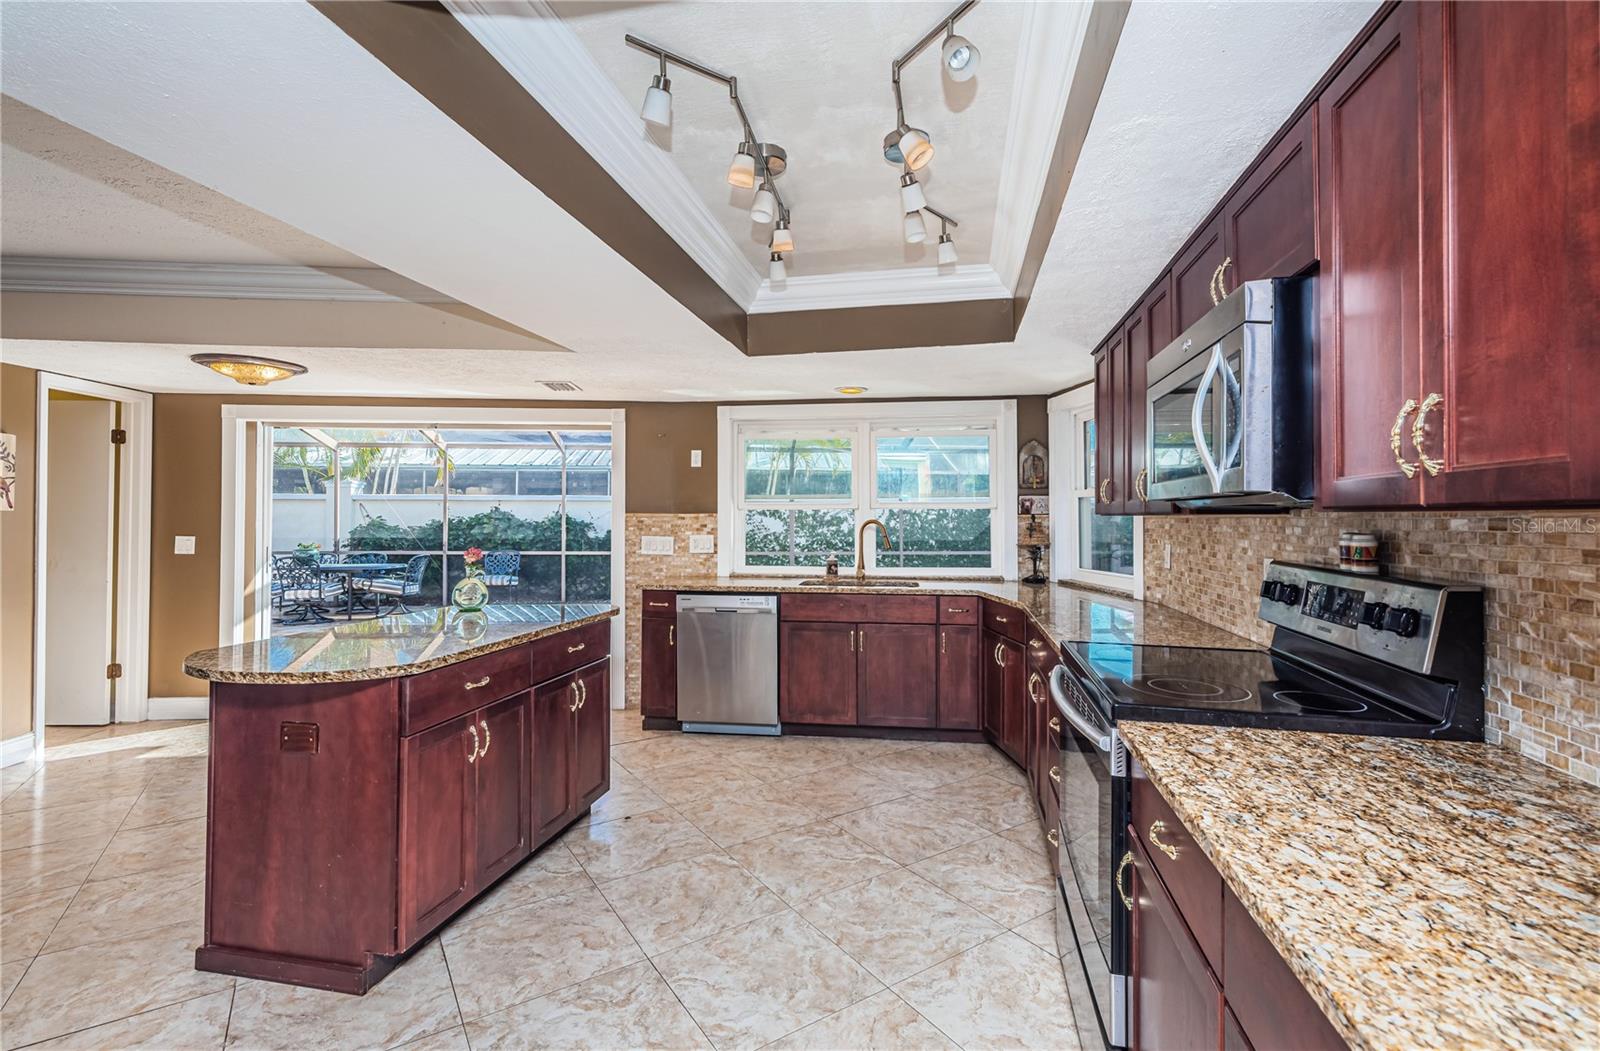 Abundant kitchen with granite counters, onyx tile backsplash and wood cabinetry...all looking out toward the lanai.